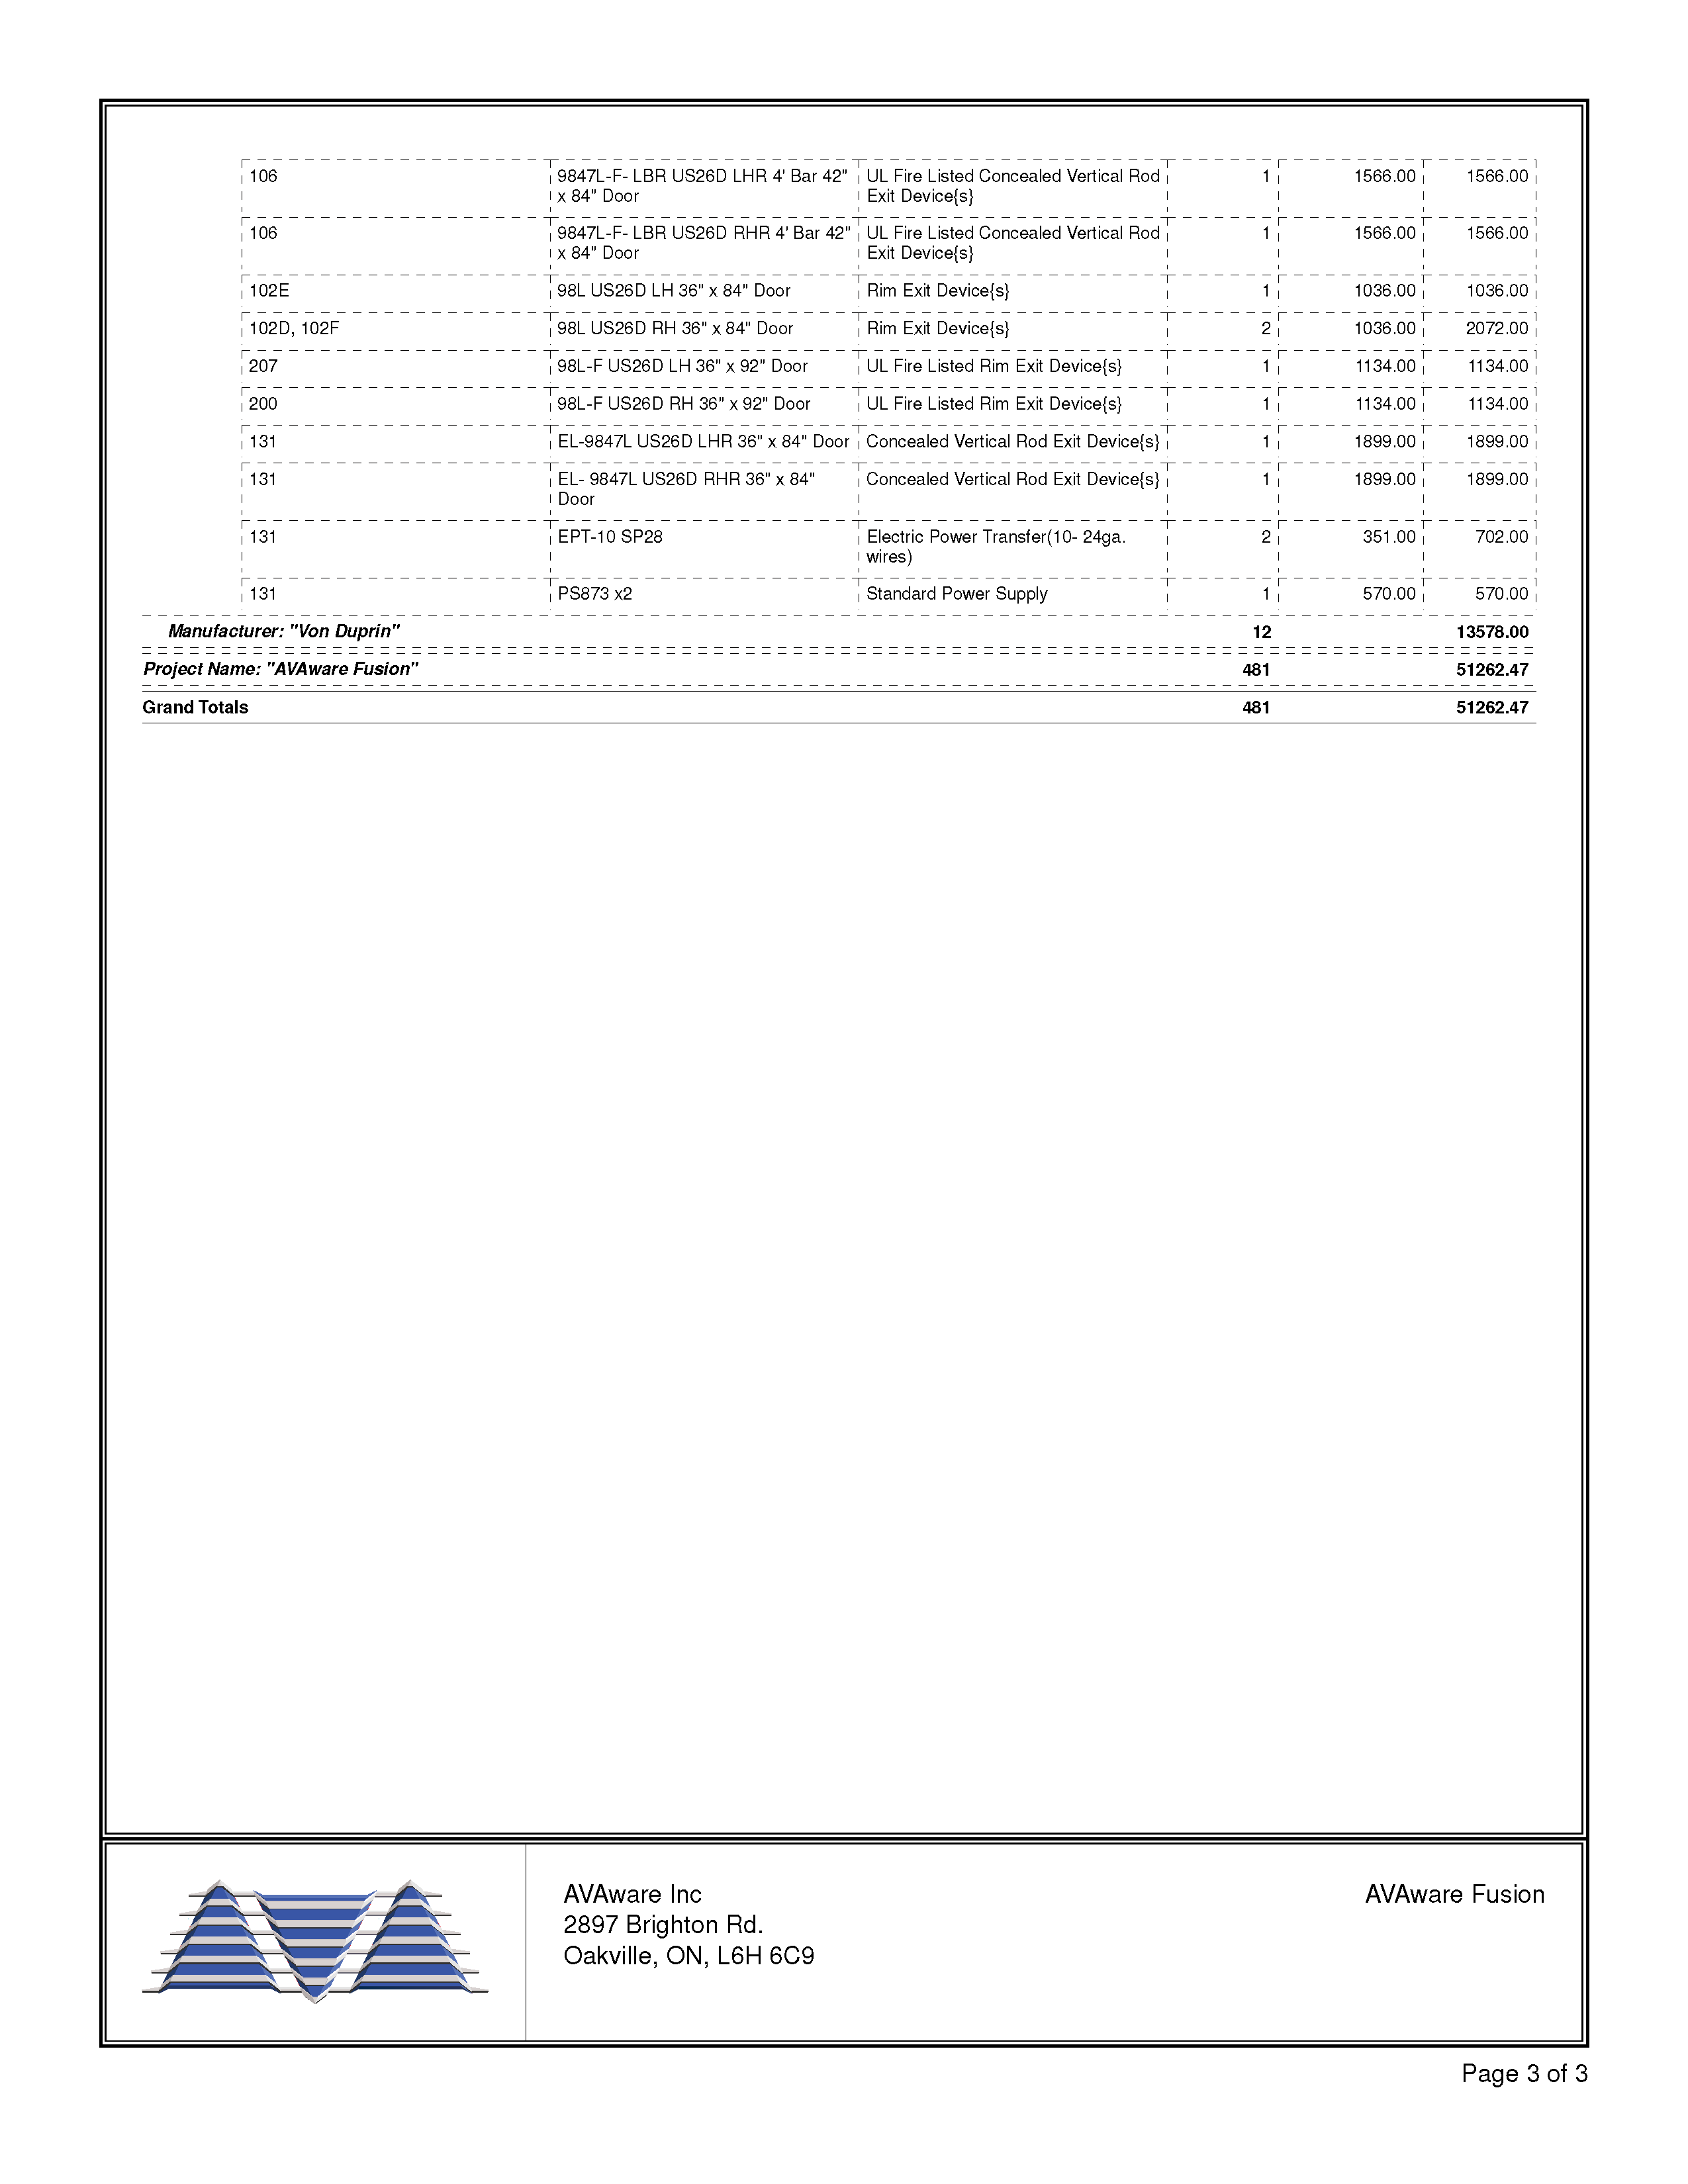 Hardware Summary by Manufacturer Page 3